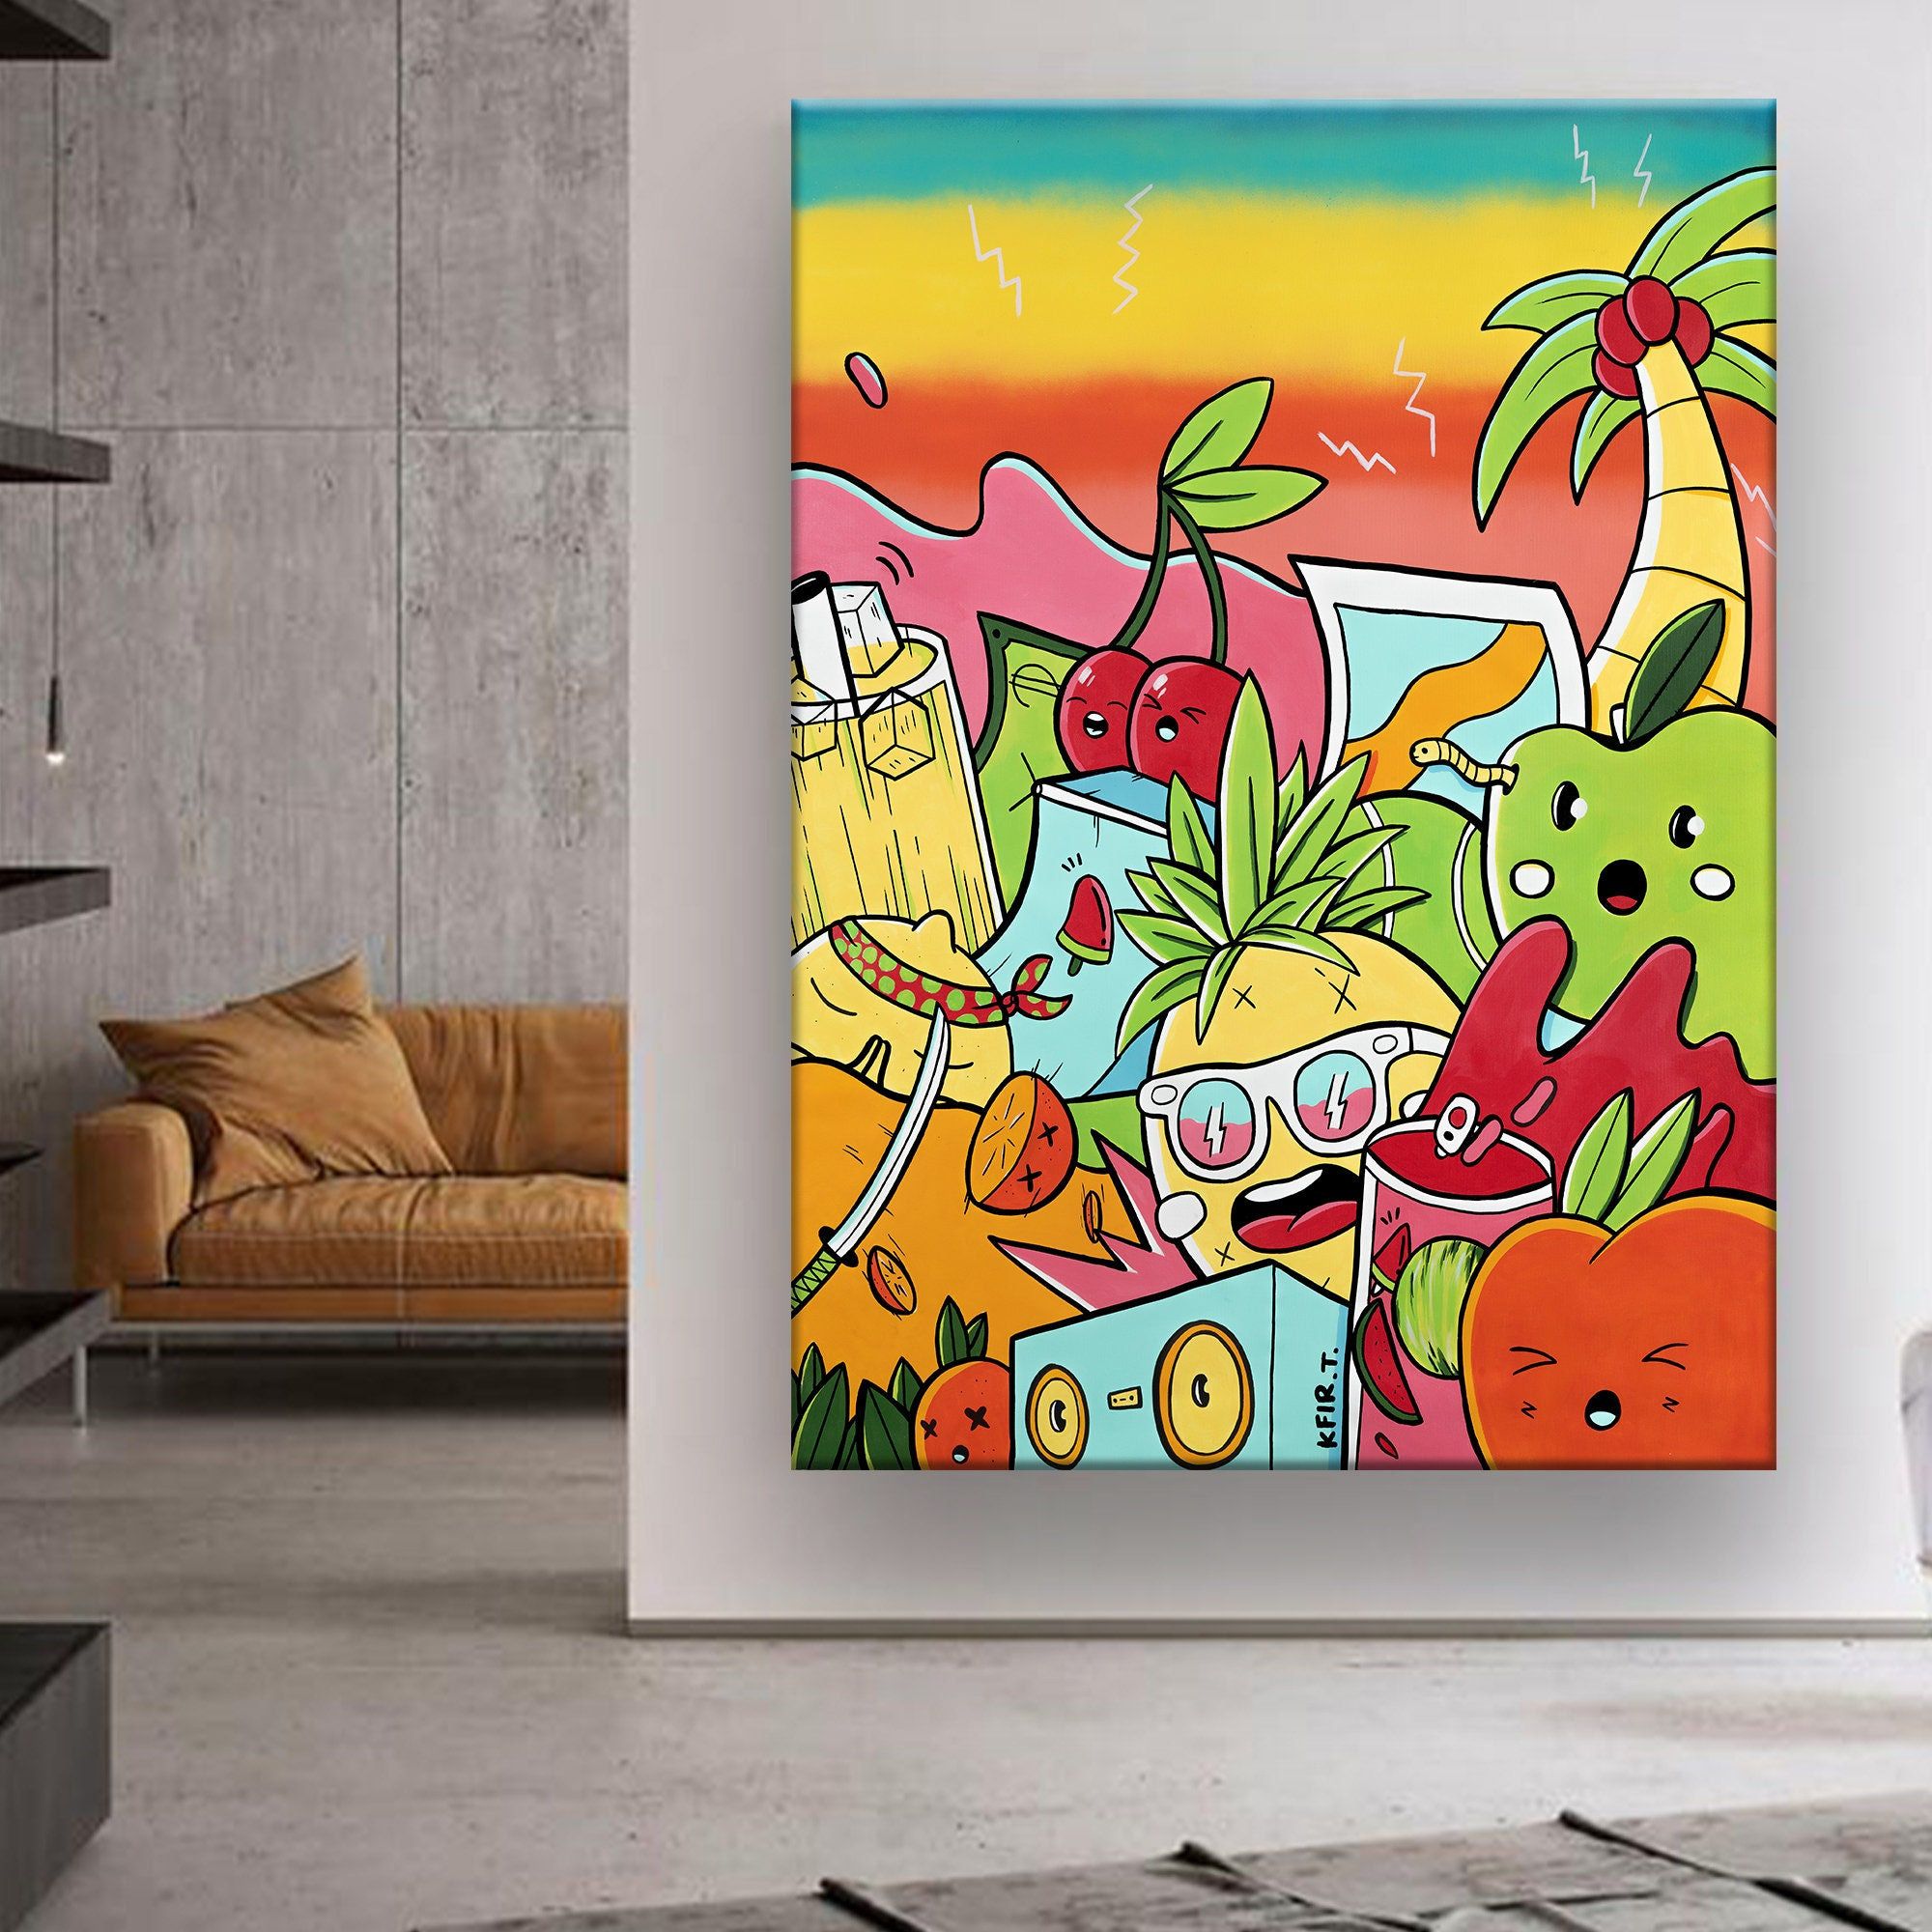 Large Graffiti Style Wall Art Vertical Colorful Street Art – Etsy Norway Intended For Most Popular Graffiti Style Wall Art (View 11 of 20)